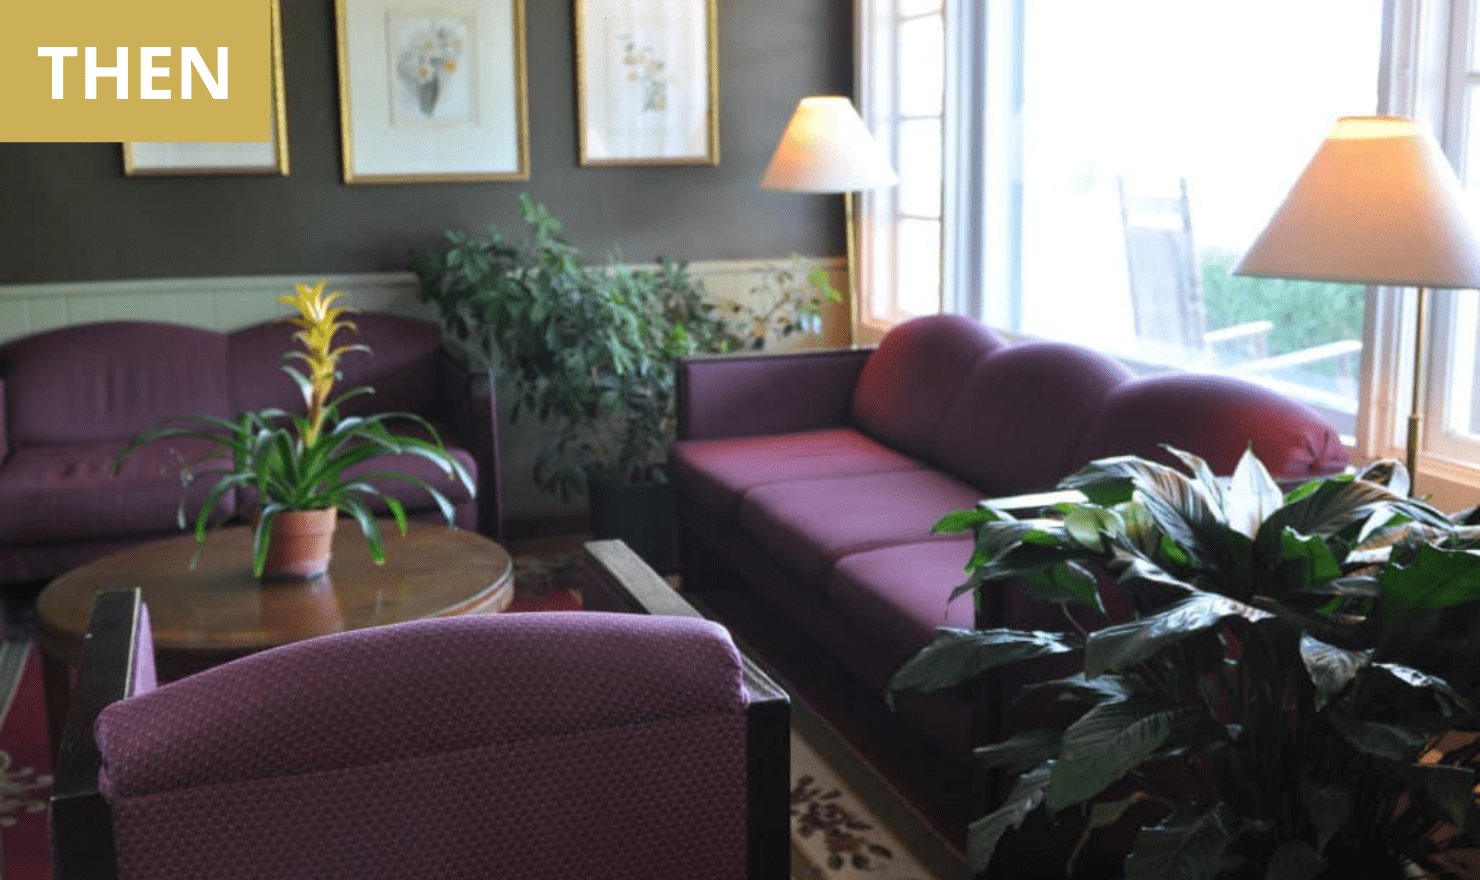 THEN: Mountainside Lobby